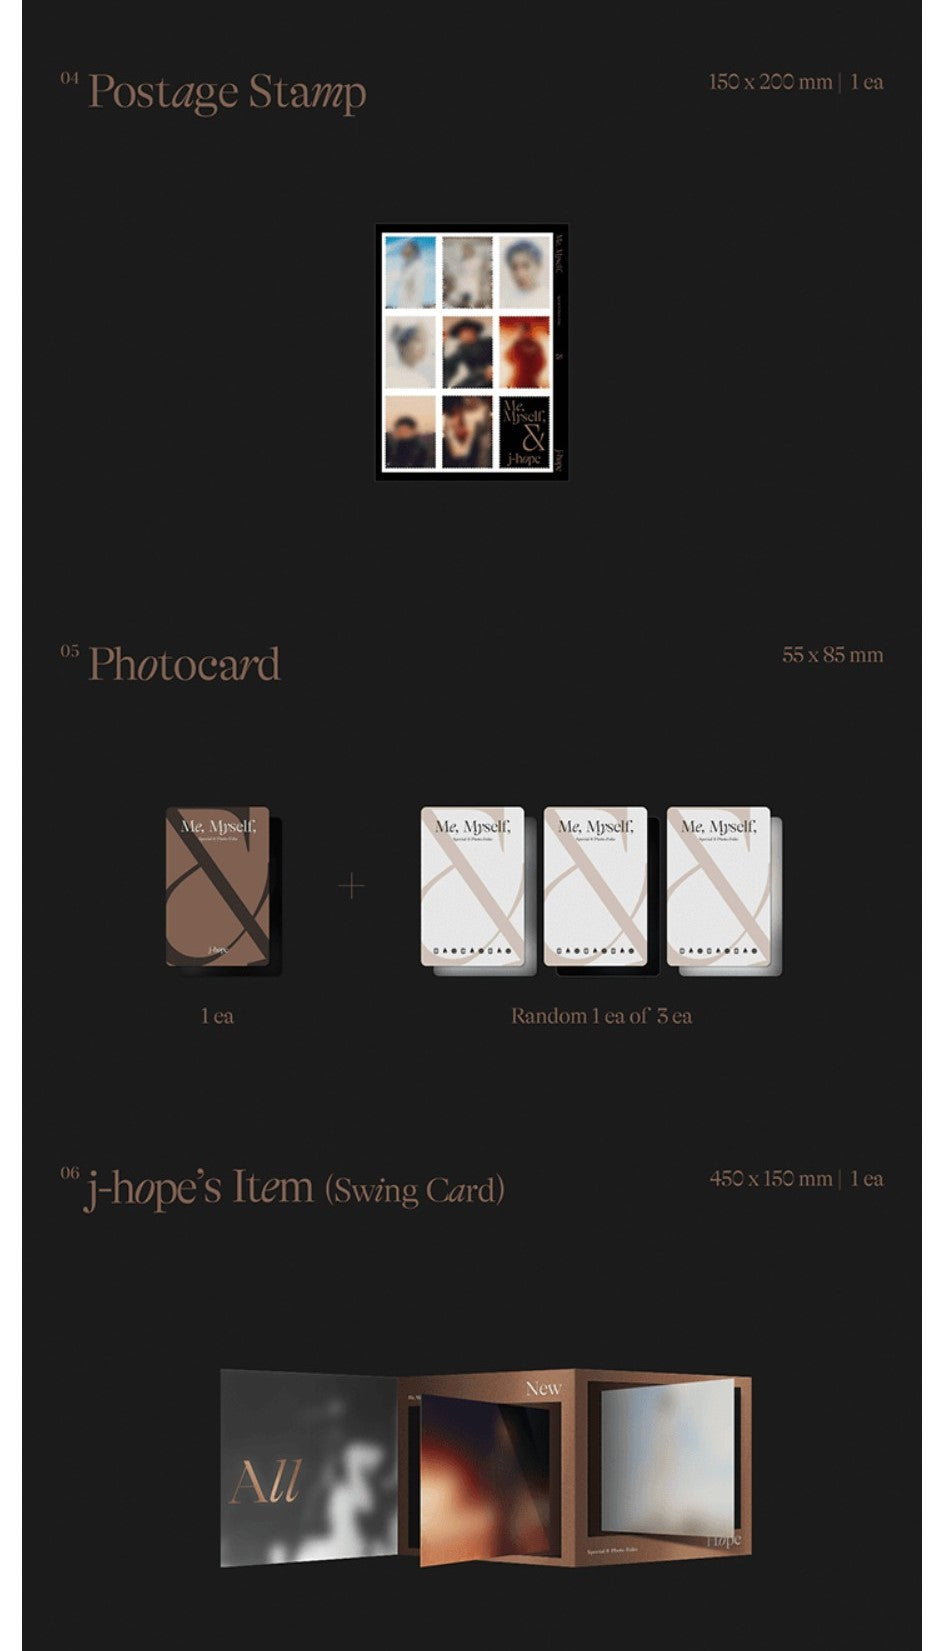 jstoreonline_SPECIAL_8_PHOTO-FOLIO_ME_MYSELF_AND_J-HOPE_ALL_NEW_HOPE